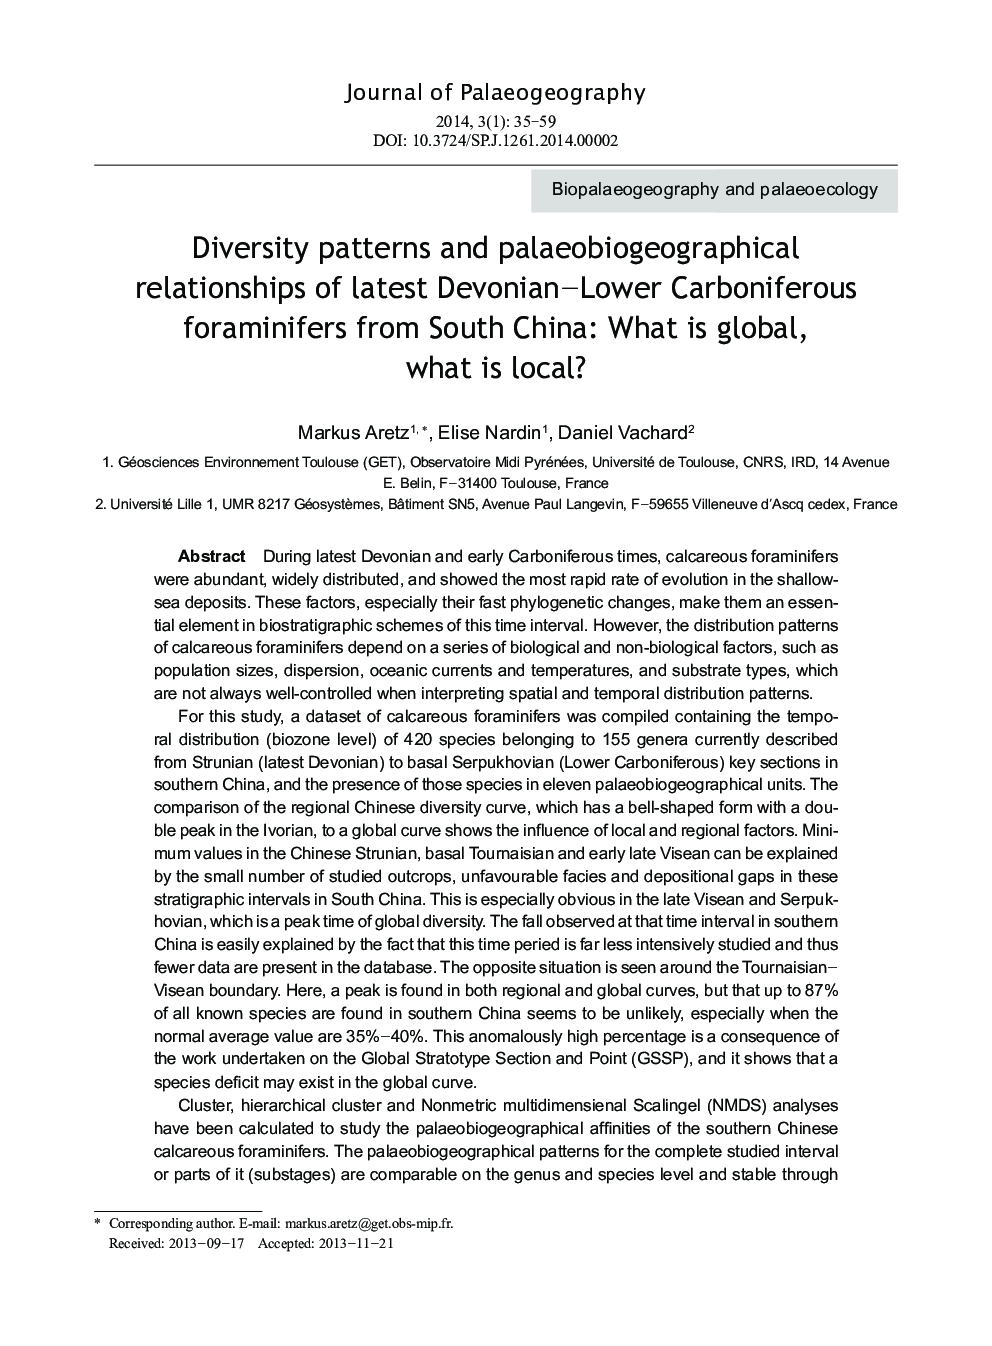 Diversity patterns and palaeobiogeographical relationships of latest Devonian–Lower Carboniferous foraminifers from South China: What is global, what is local?